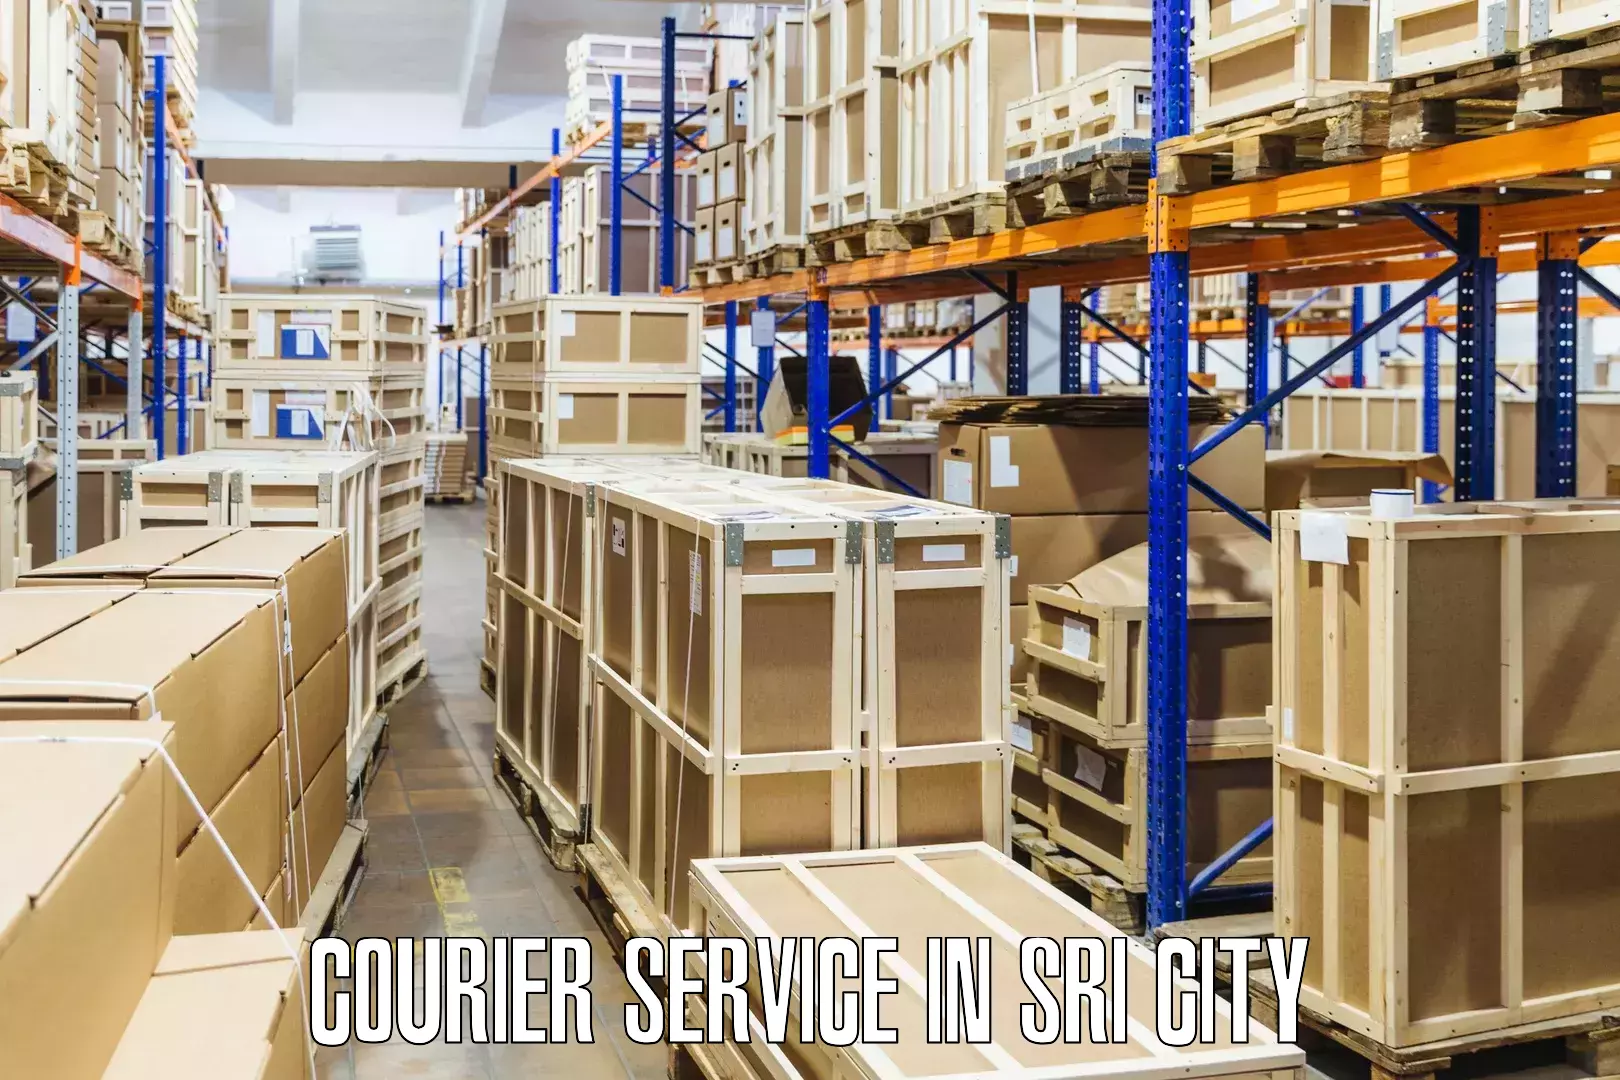 Quality courier services in Sri City